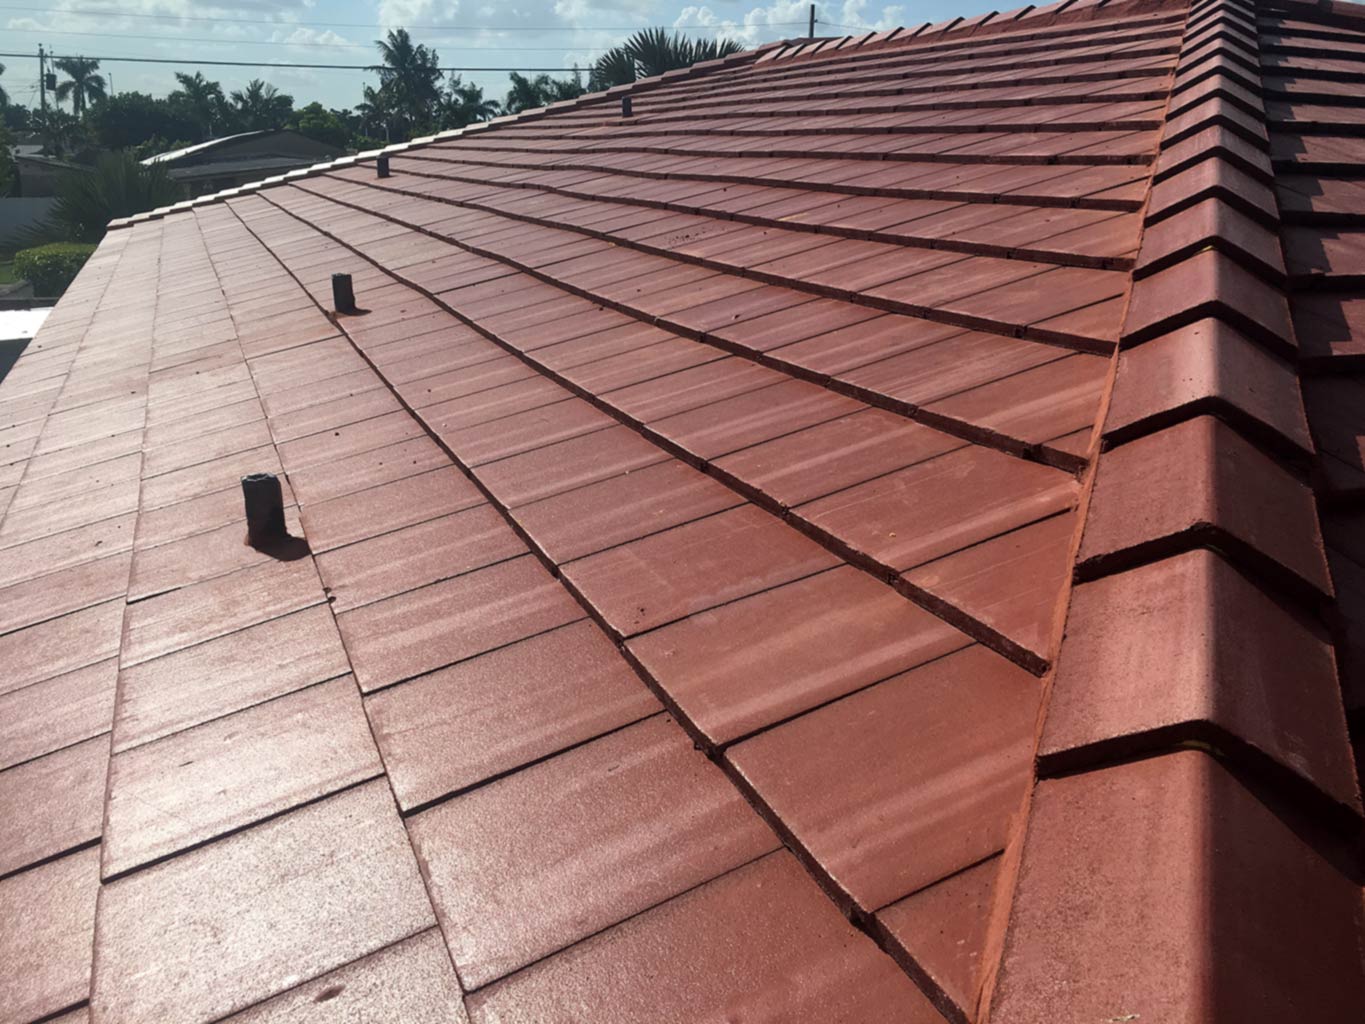 Red Roof Tiles in Sunset, MiamiDade — Miami General Contractor